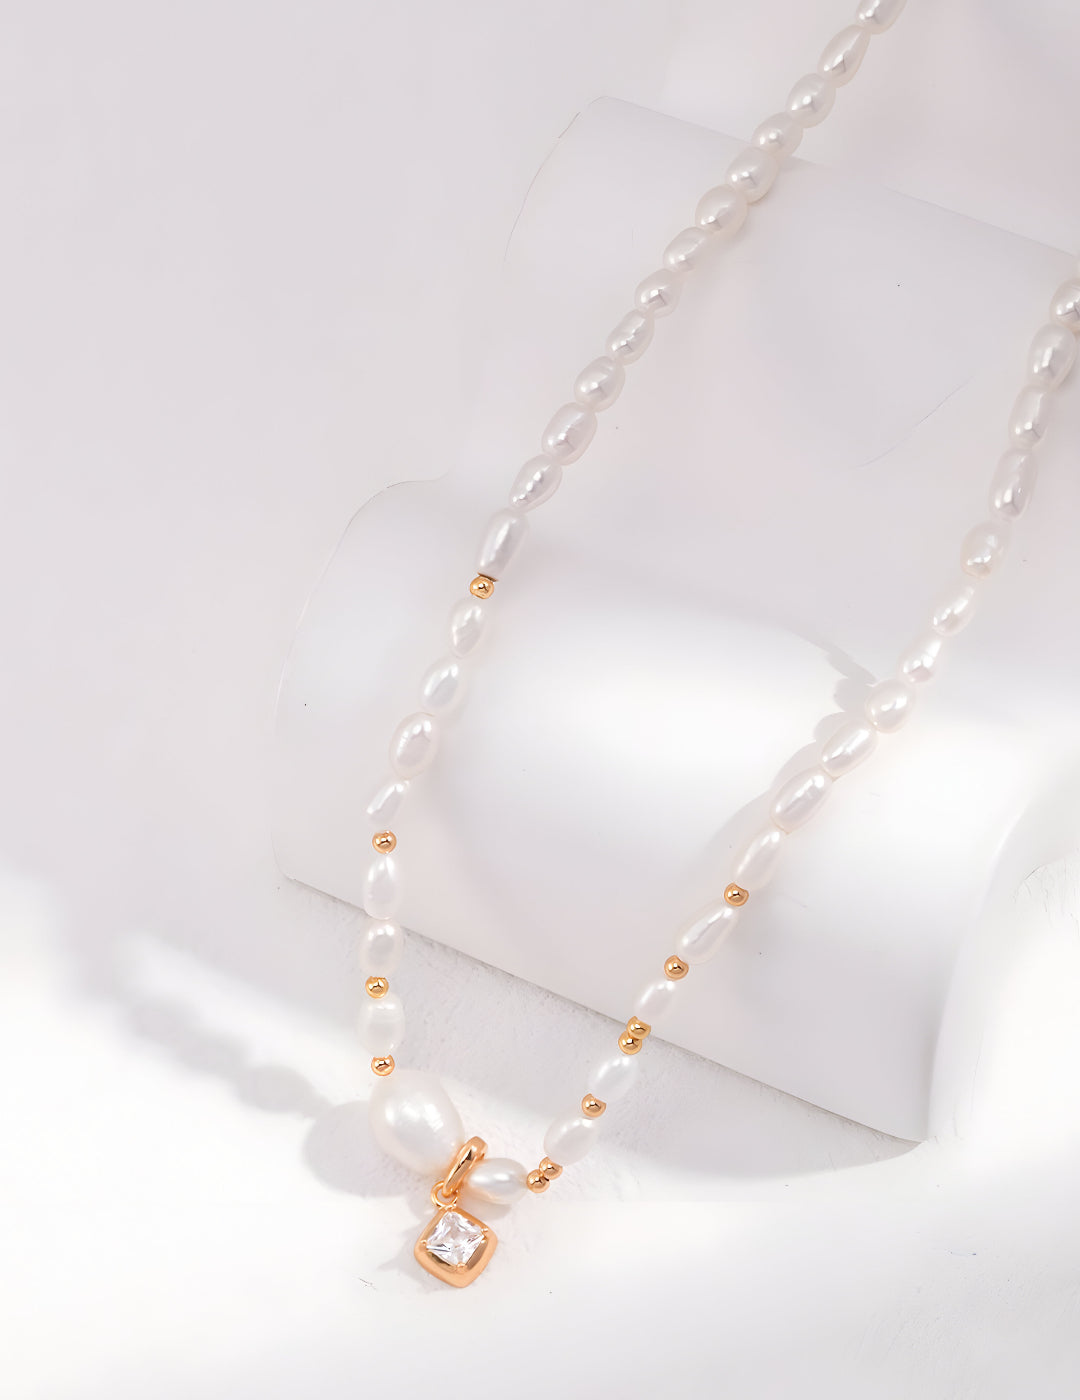 Allure of Pearl Luminance Necklace with the sparkle of Zircons - beautifully combined to create a captivating piece -  S925 Sterling Silver with 18K Gold-plated necklace - radiant and lively accessory.